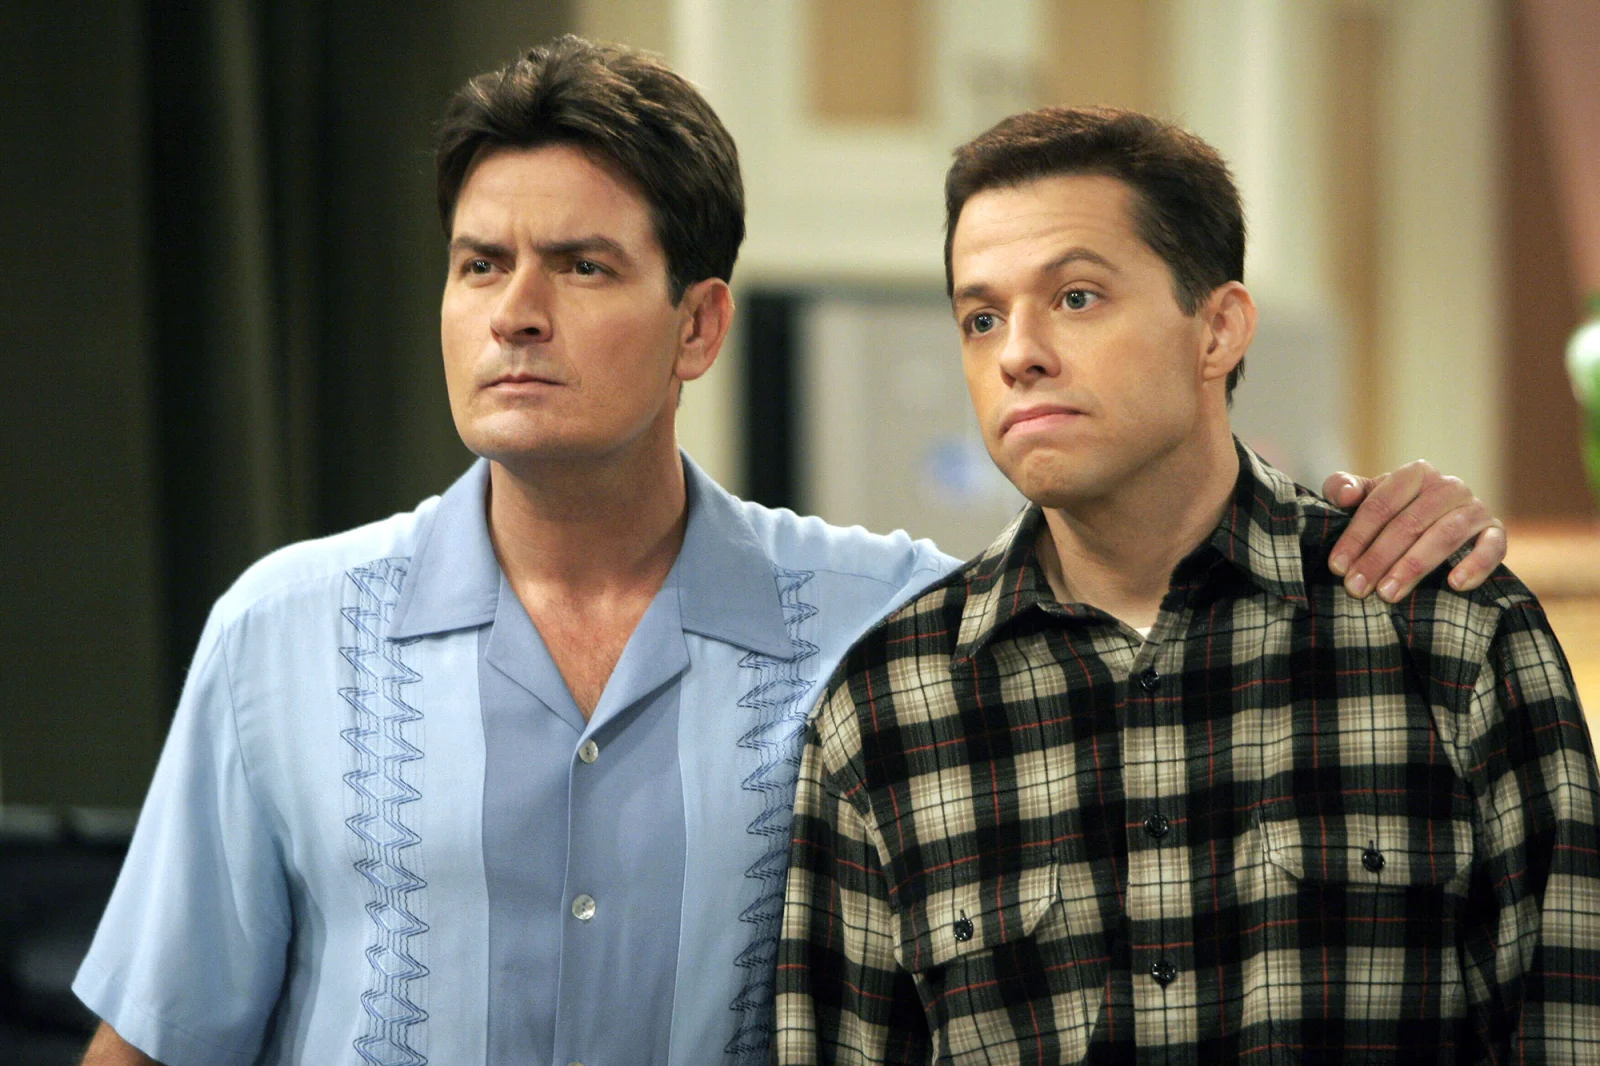 Charlie Sheen and Jon Cryers Ups and Downs Two and a Half Men Fallout2